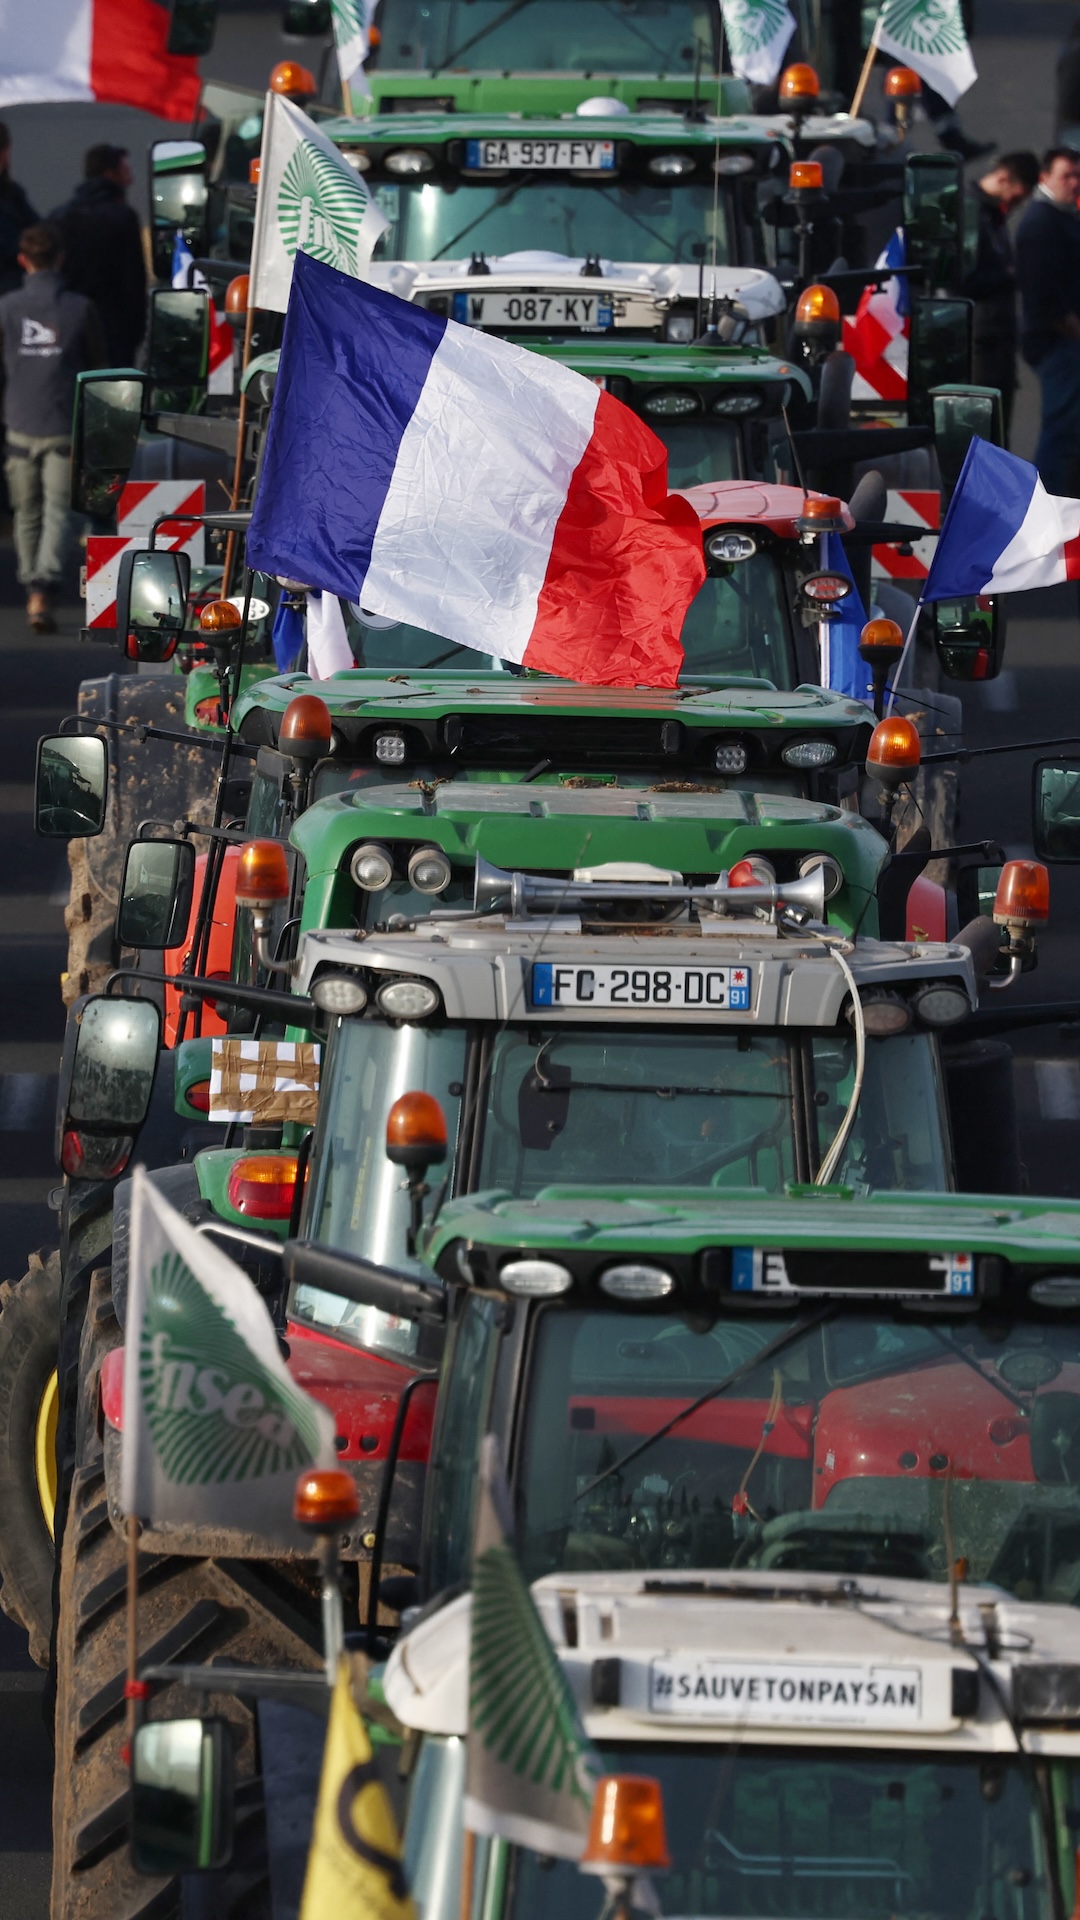 Why farmers blocked a highway in Paris